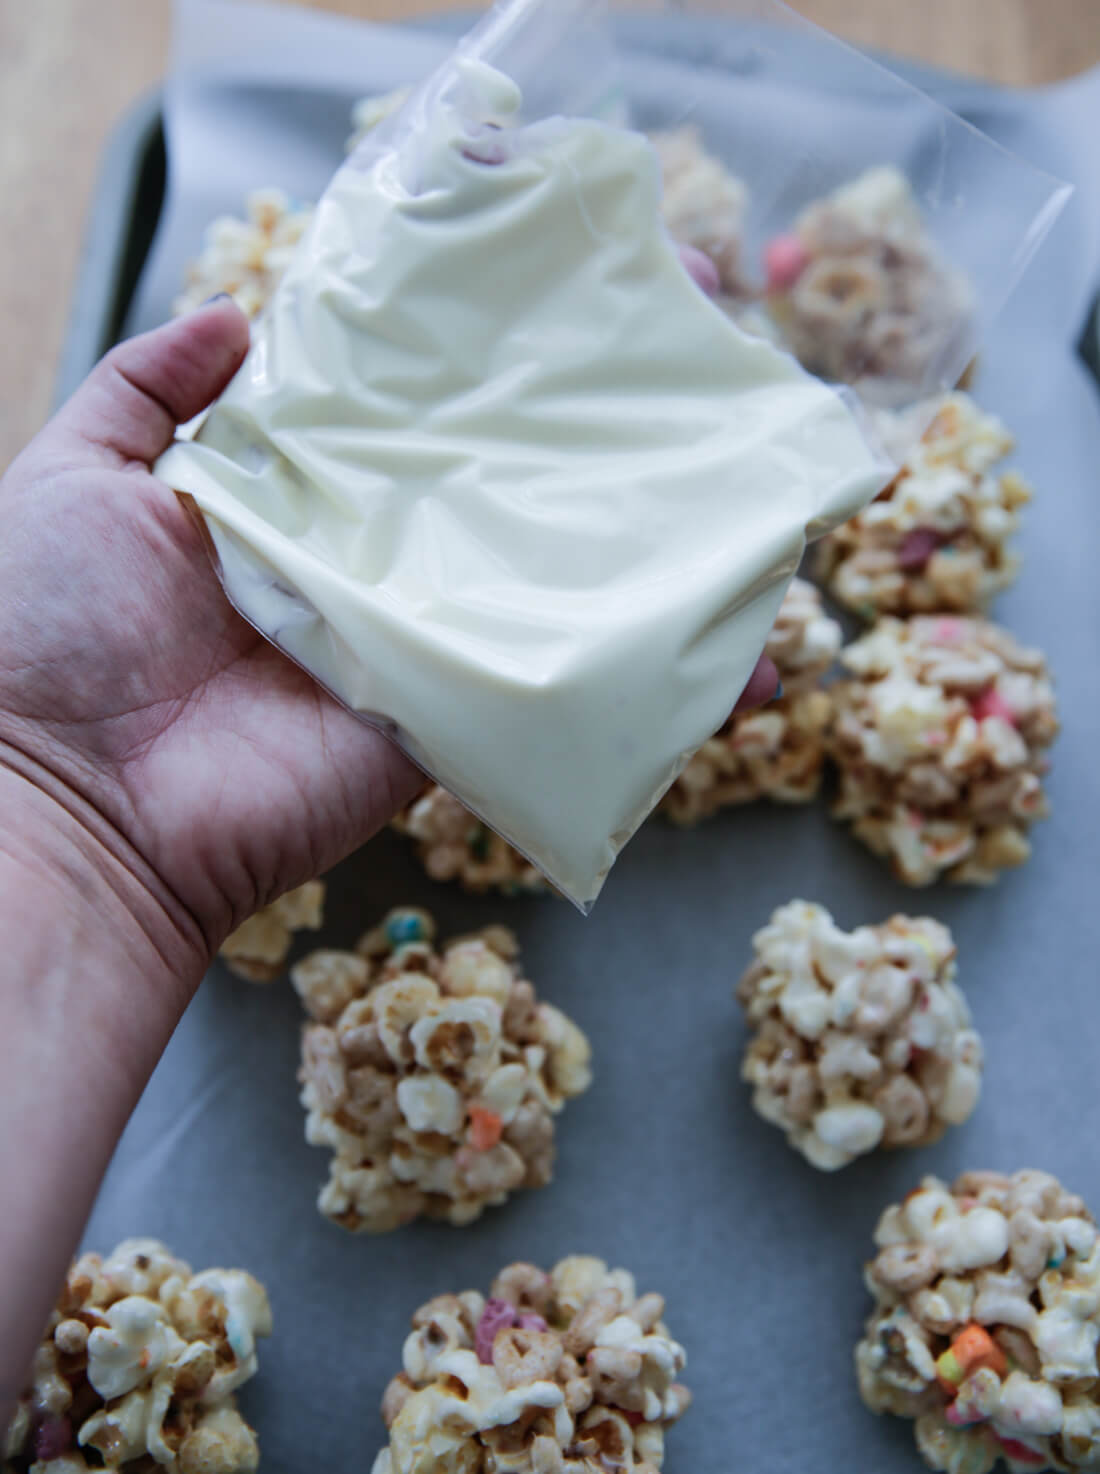 How to make popcorn balls - kicking it up a notch by adding white chocolate and sprinkles